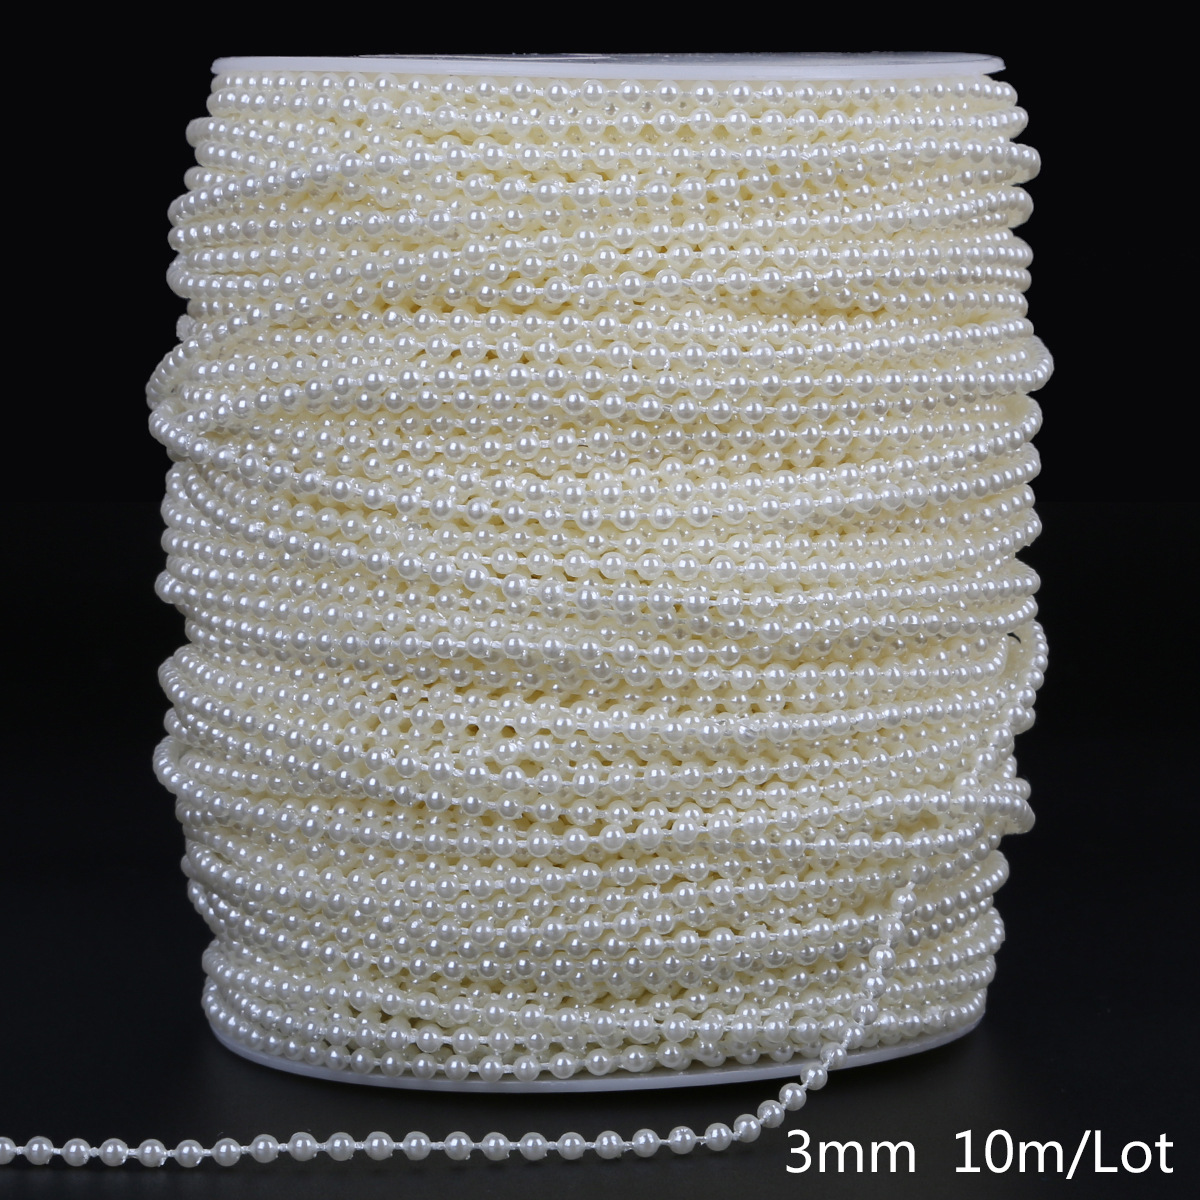 1:Round, 3mm 10m/pack/ about 40g